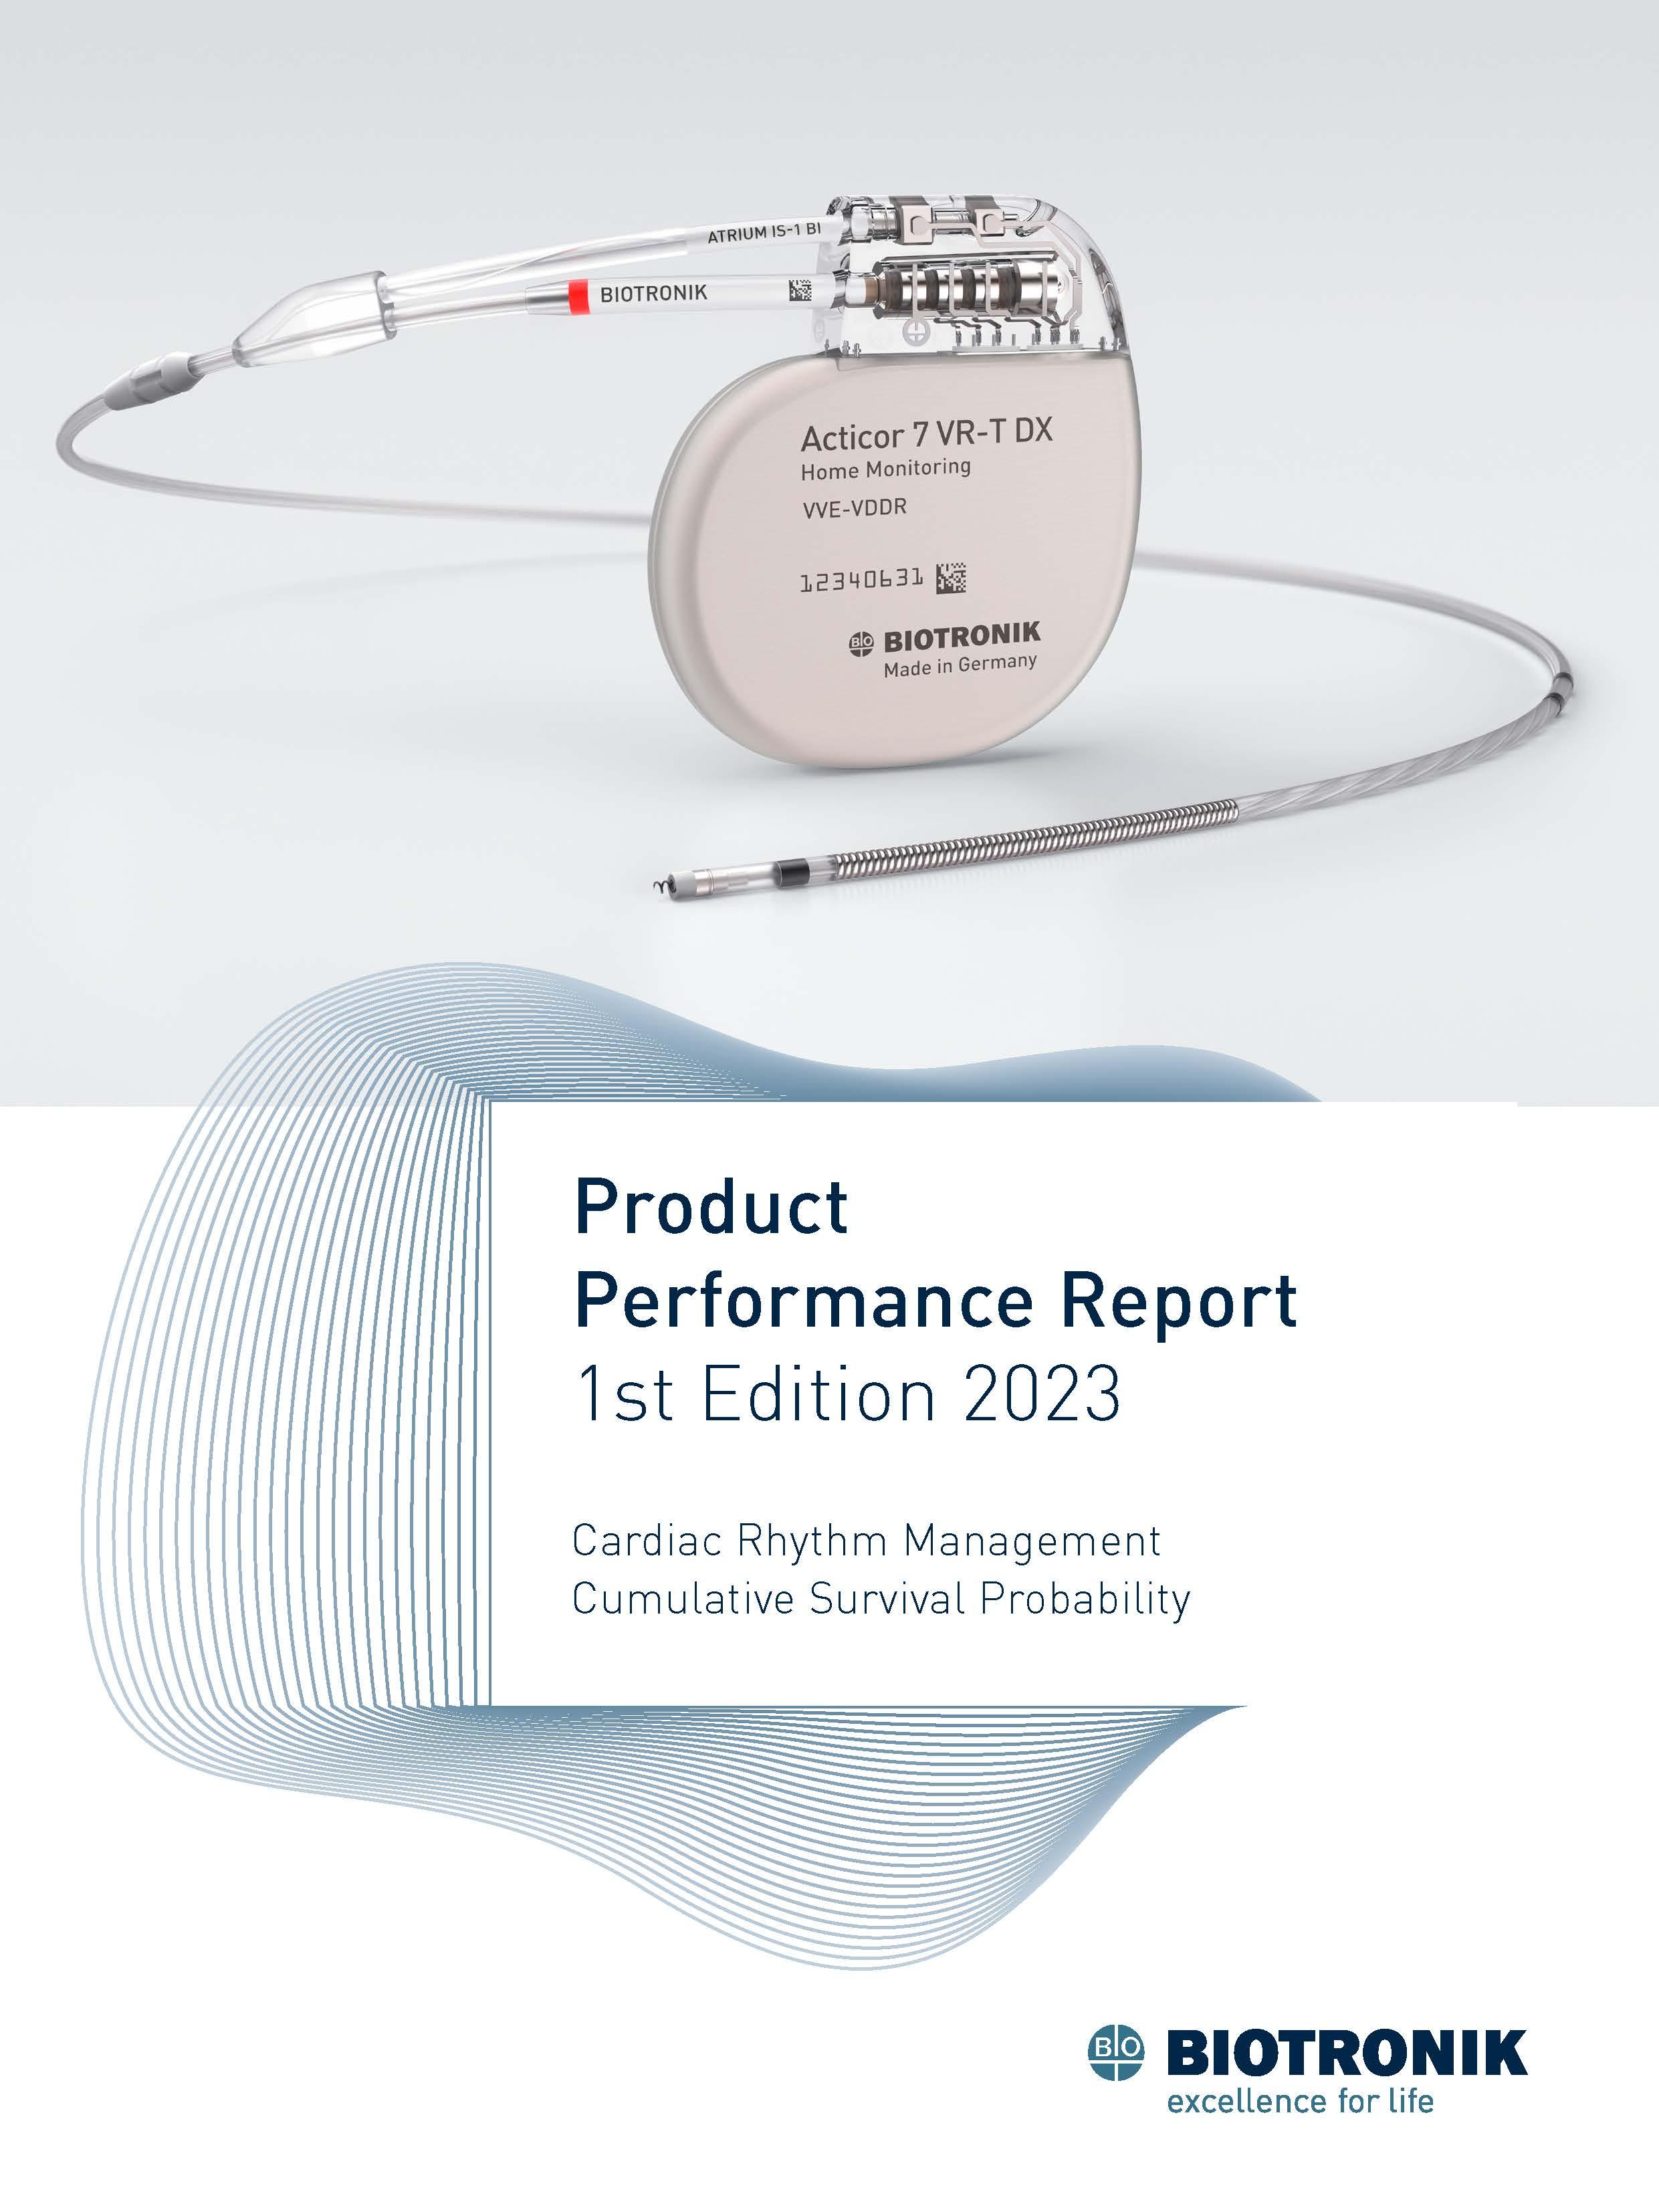 Product Performance Report 1st Edition 2023